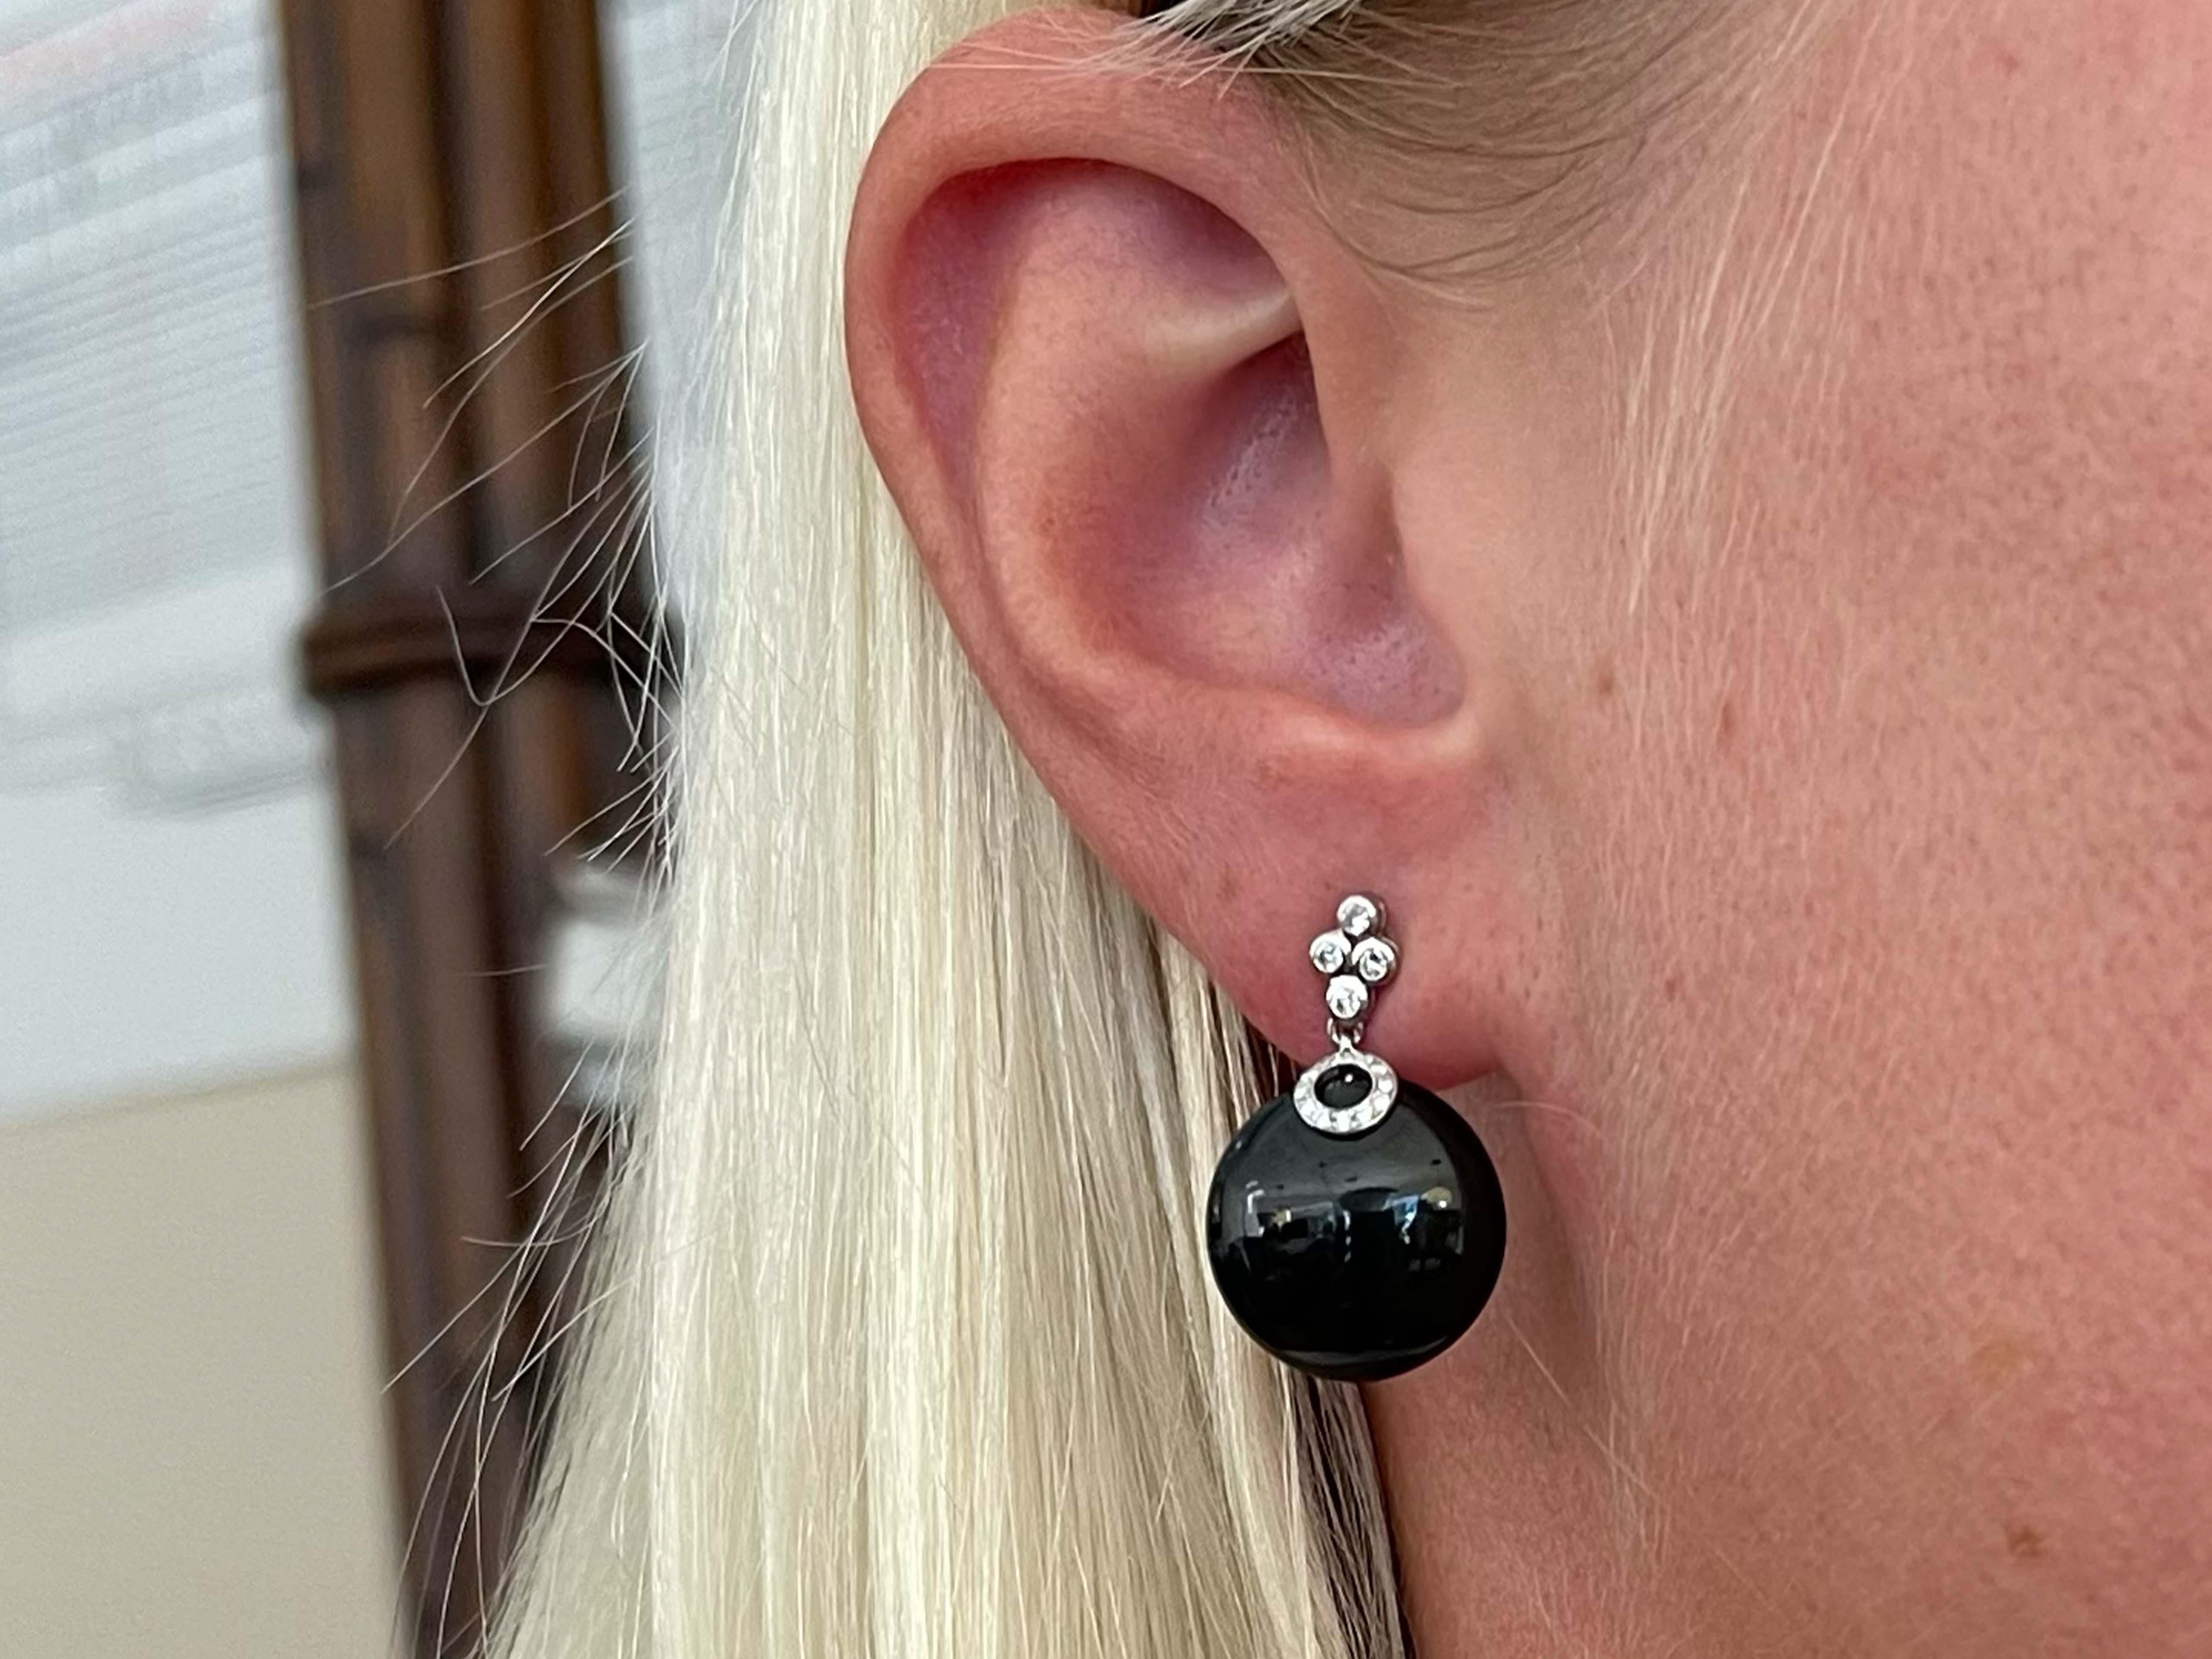 Item Specifications:

Style: Diamond & Black Onyx Earrings

Metal: 18K White Gold 

Diamond Color: G-H

Diamond Clarity: VS

Diamond Weight: 0.14 carats

Weight: 7.0 Grams
​
​Onyx Diameter: 15.47 mm

Earring Length: 24 mm 

Condition: Vintage,